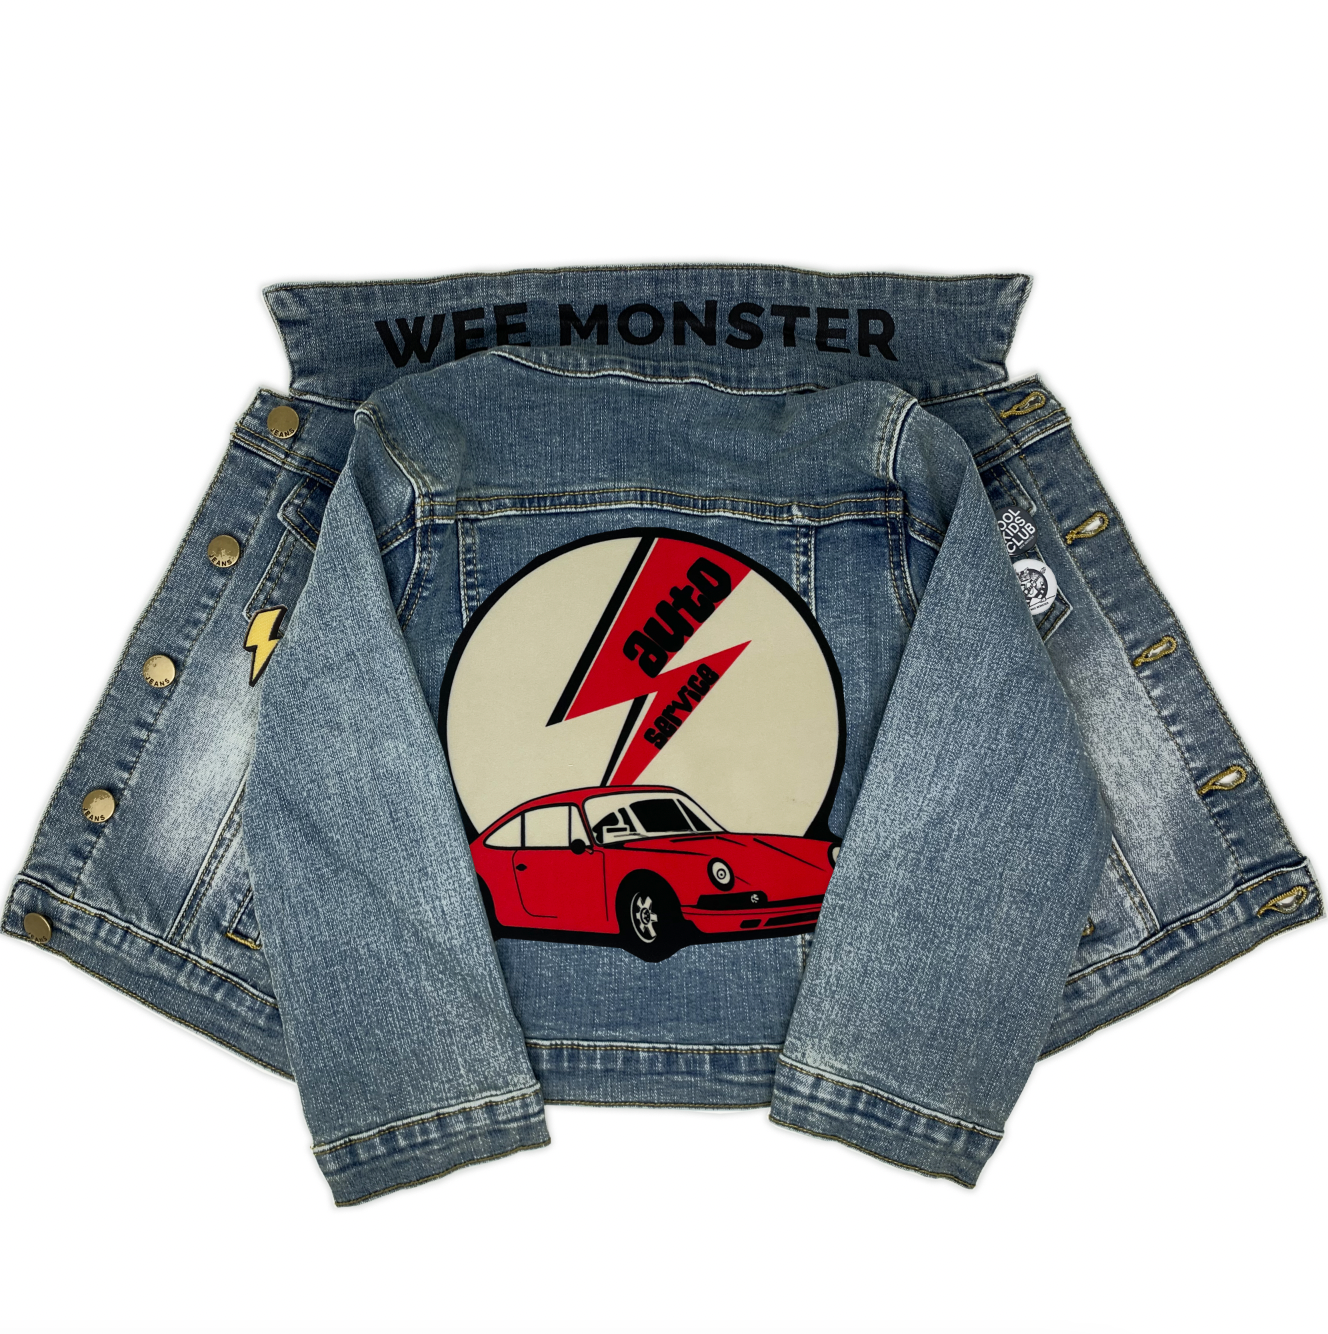 Auto Service Denim Jacket - Unisex for Boys and Girls – Wee Monster